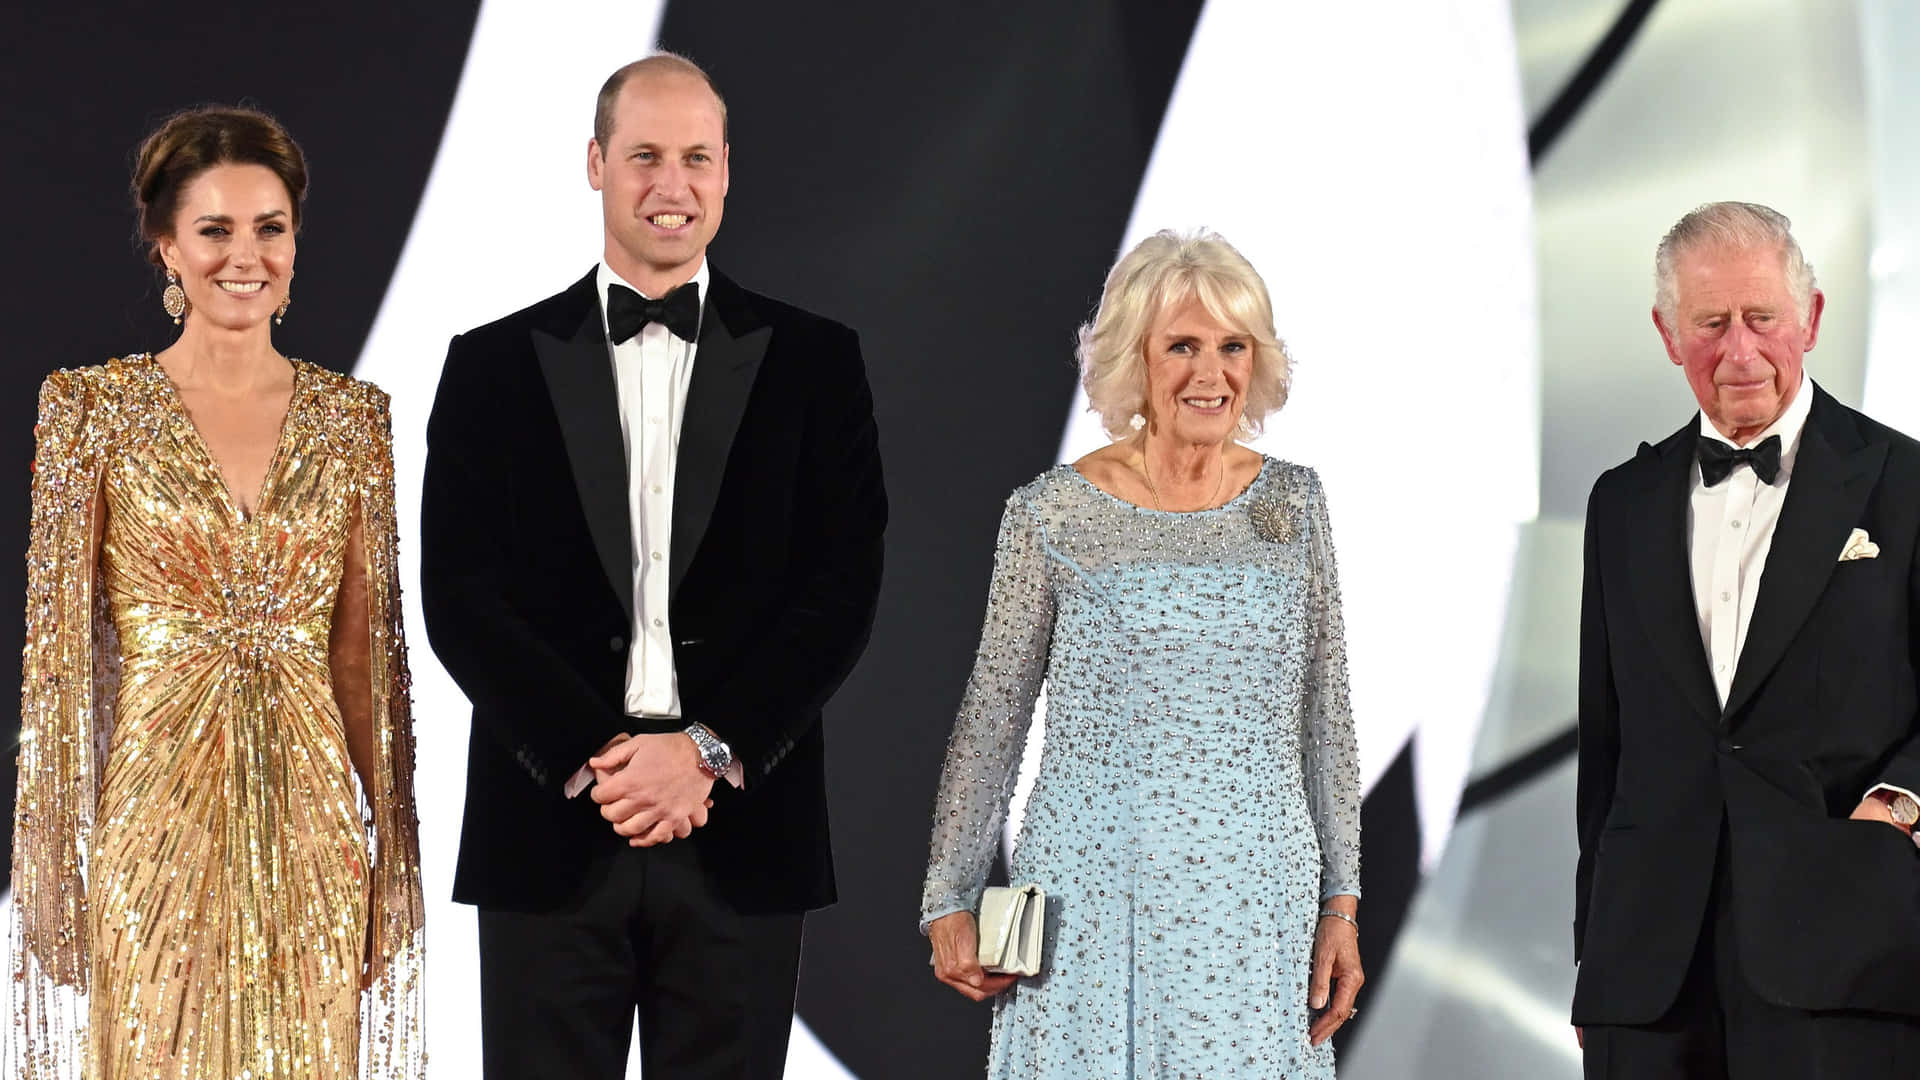 Camilla, Duchess of Cornwall, Prince Charles, Prince William, and Catherine, Duchess of Cambridge Smiling Together Wallpaper